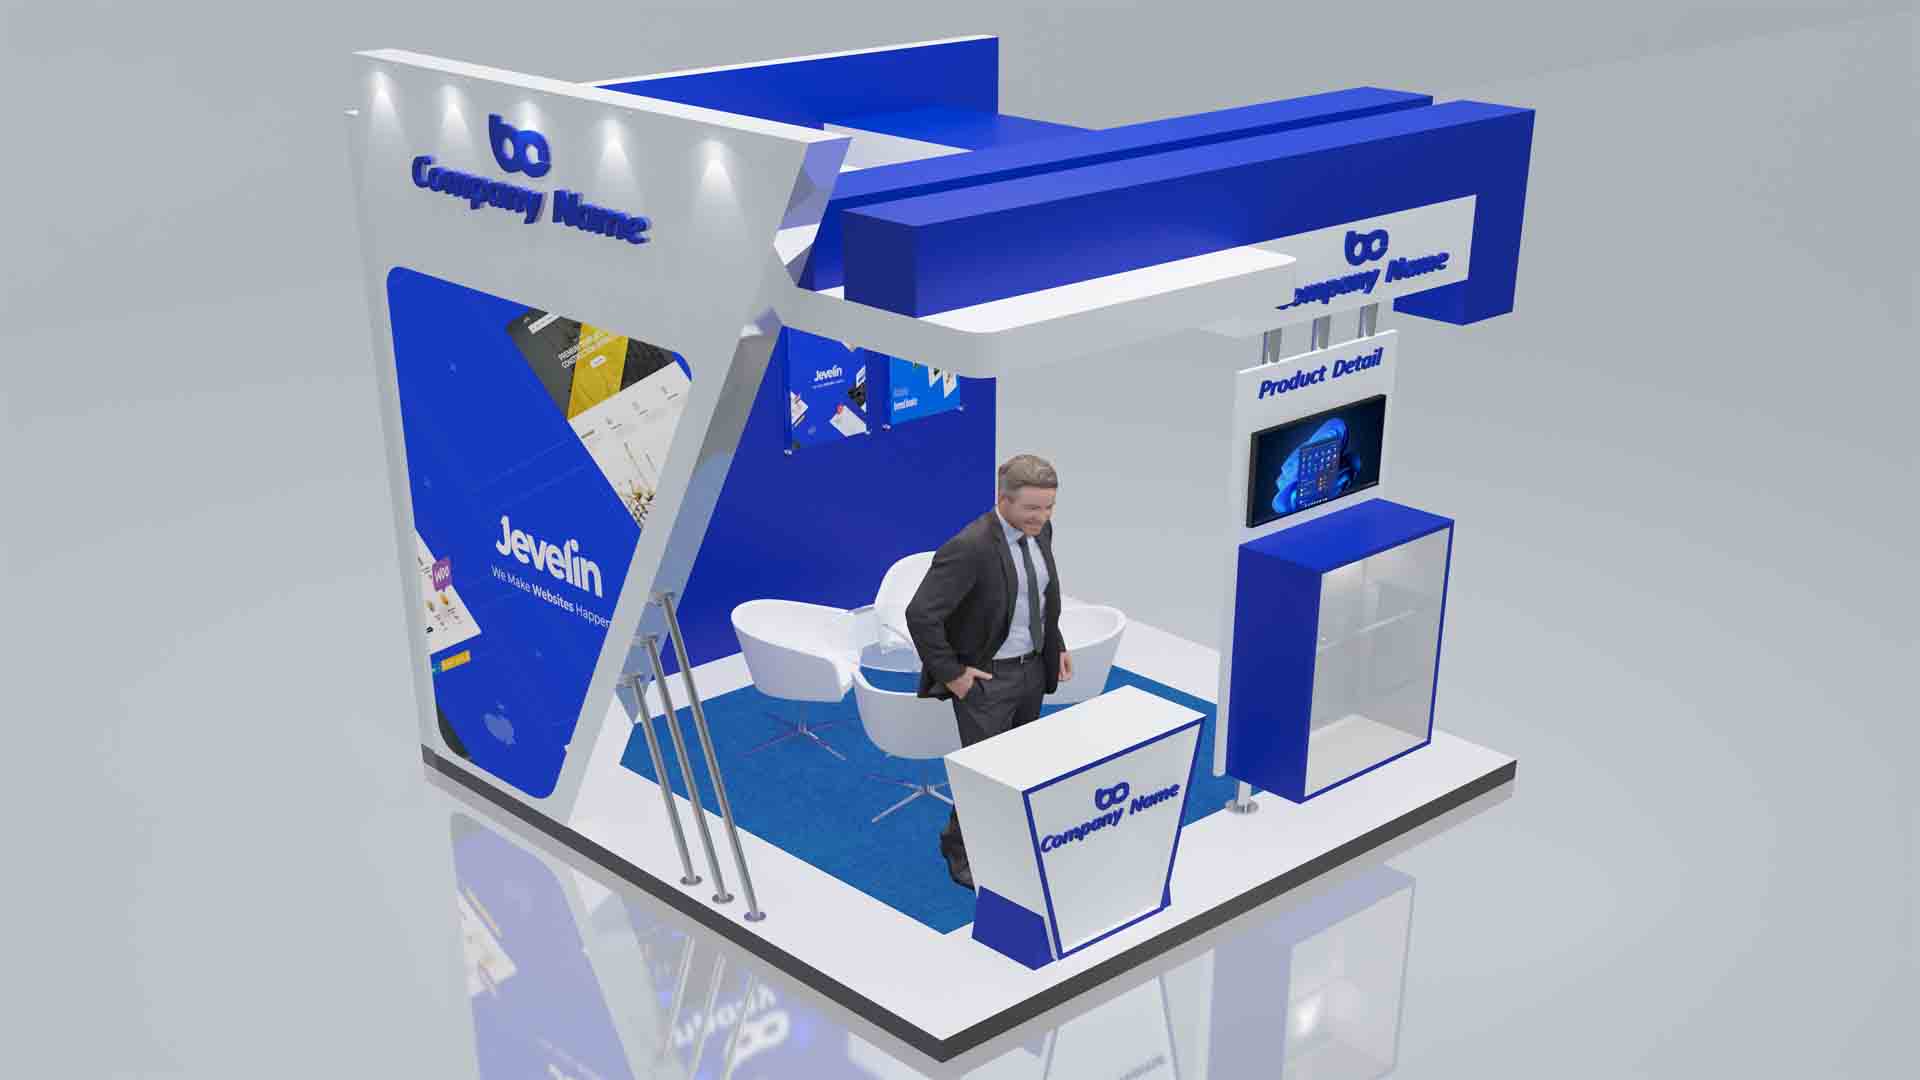 How to Find Best Exhibition Stand Design Company